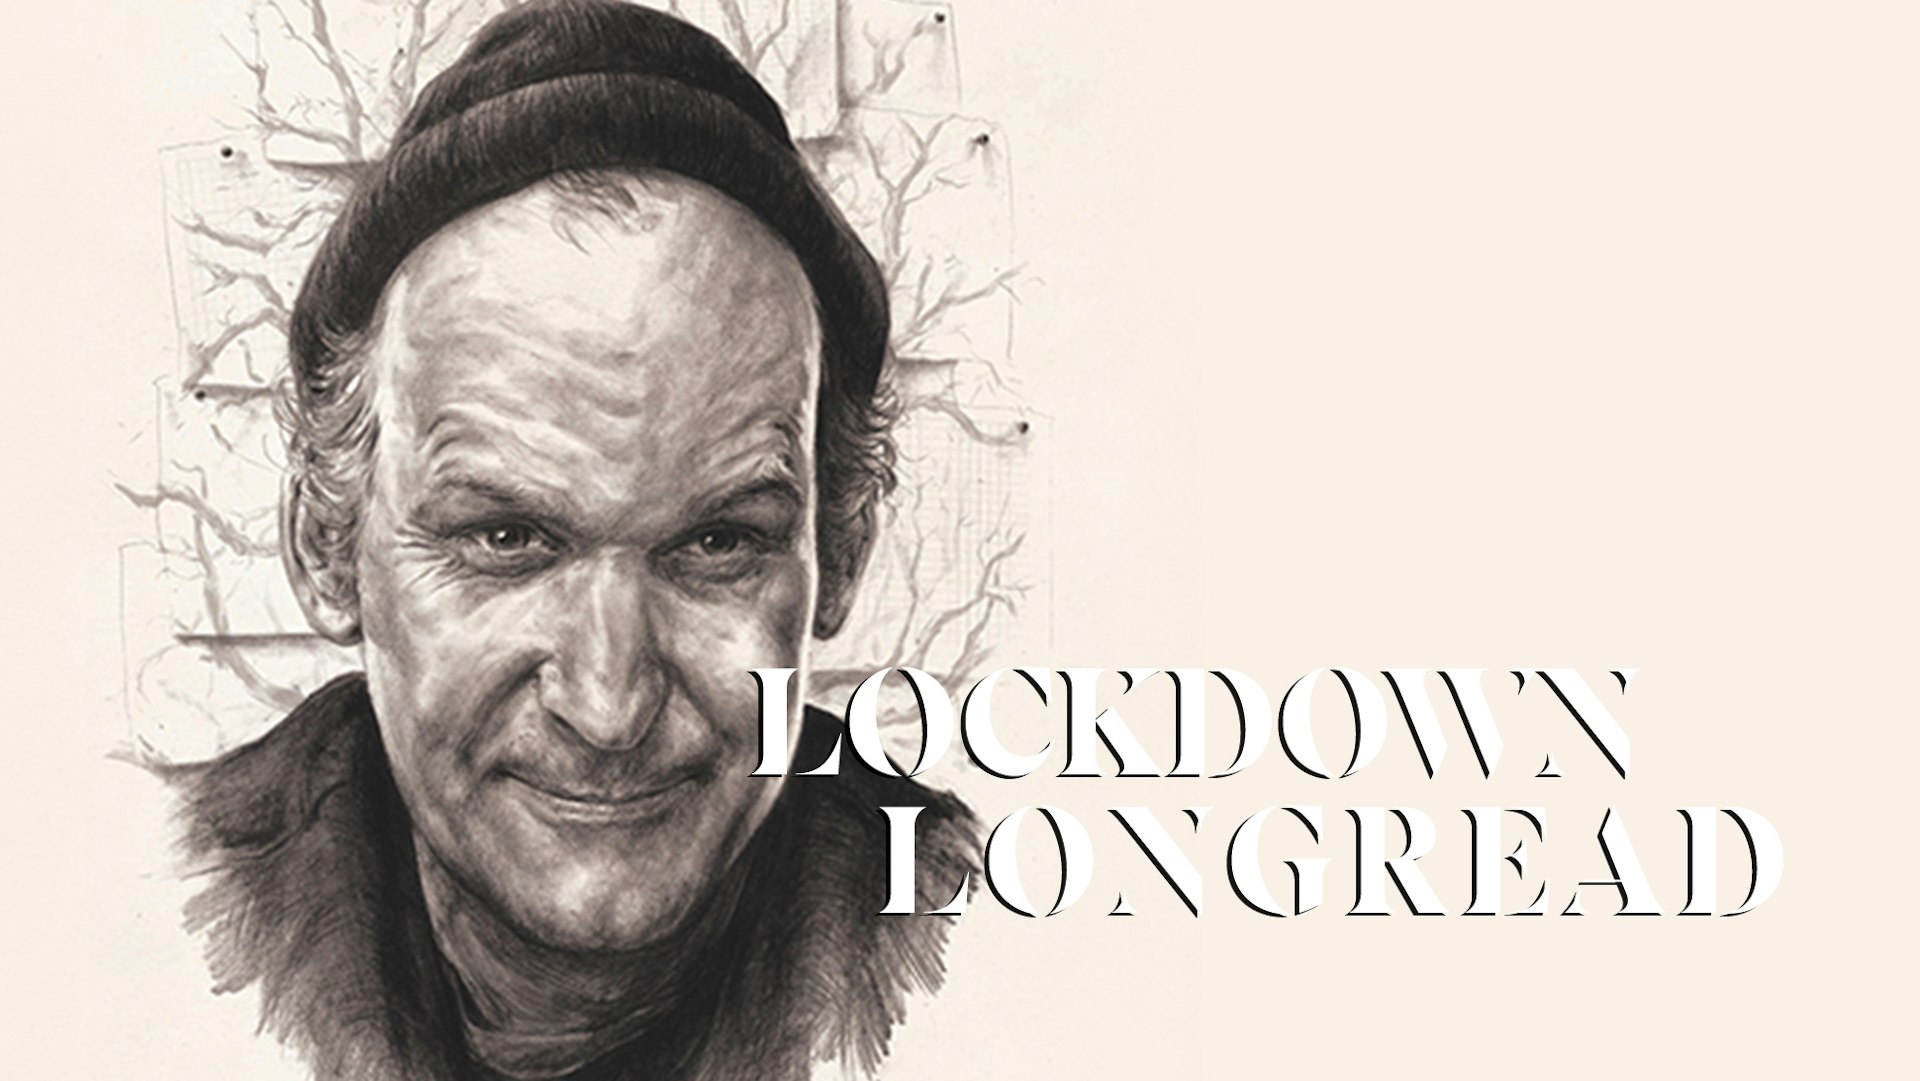 Getting deep with Ian MacKaye, the godfather of DIY culture